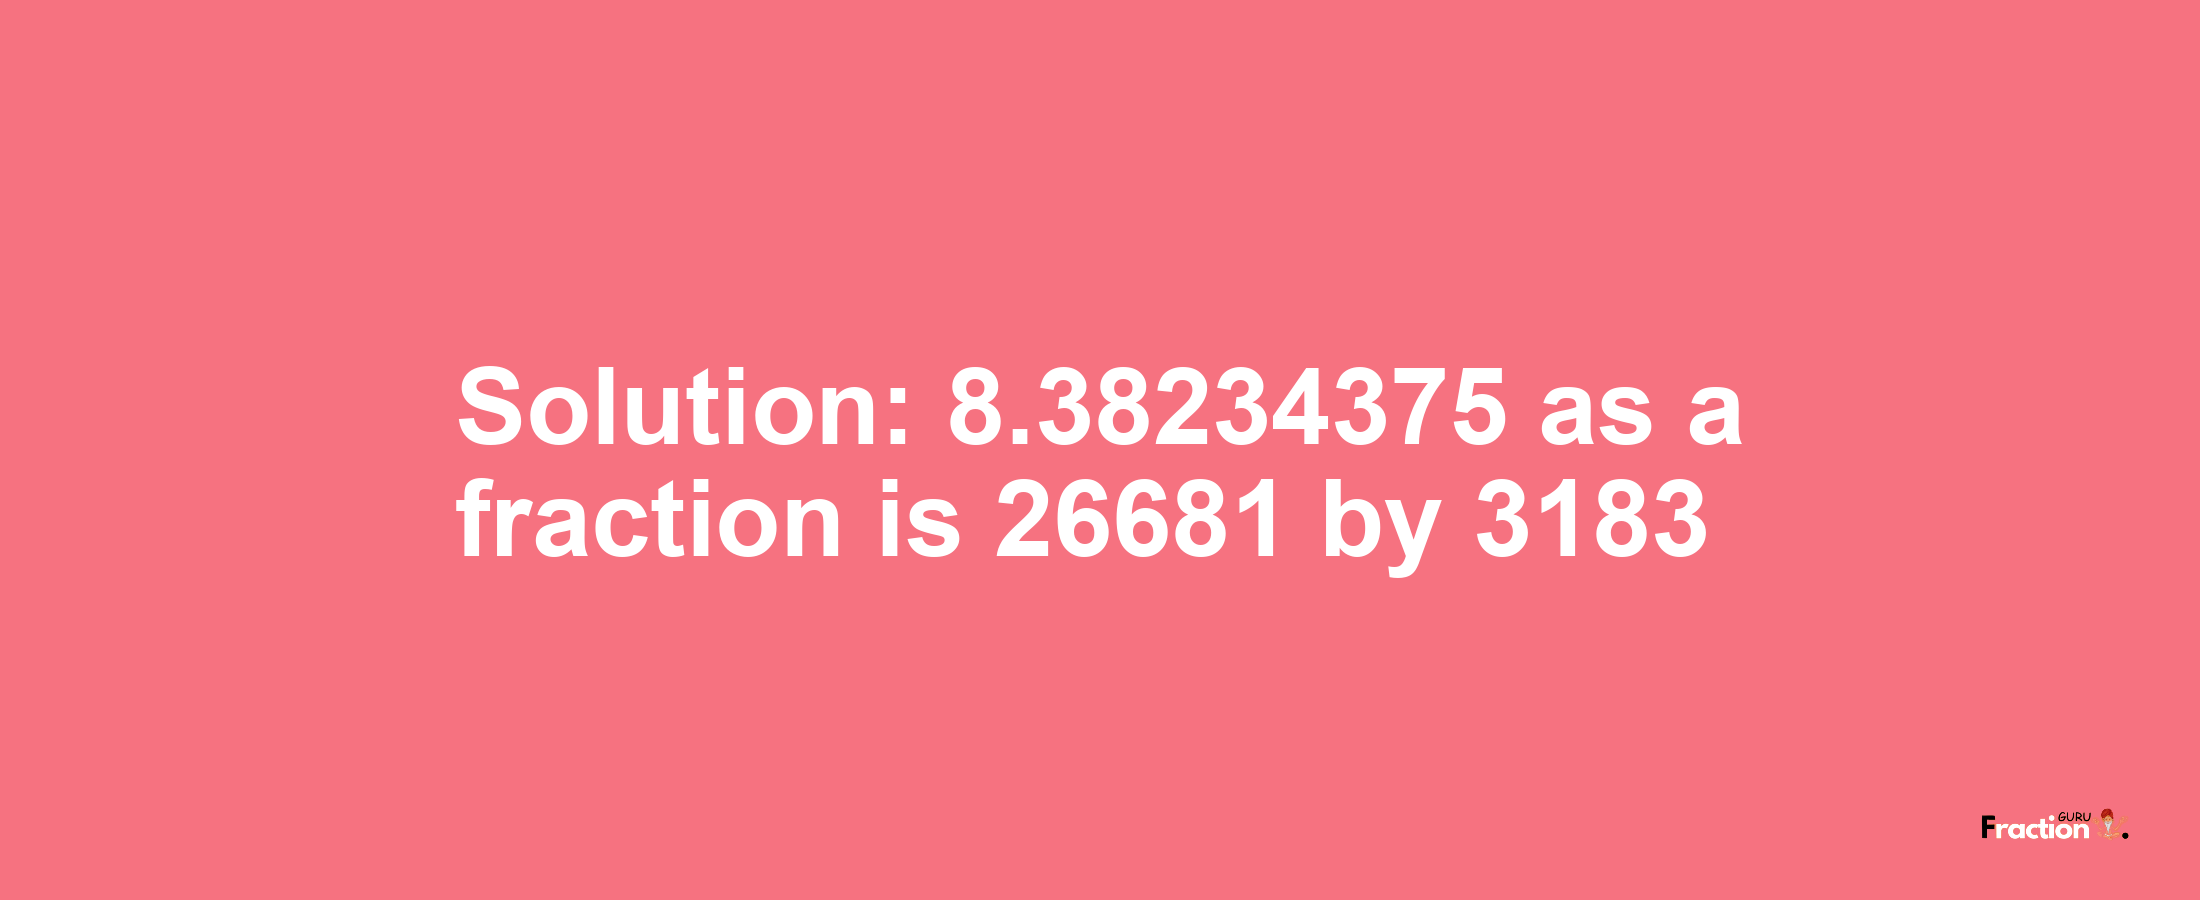 Solution:8.38234375 as a fraction is 26681/3183